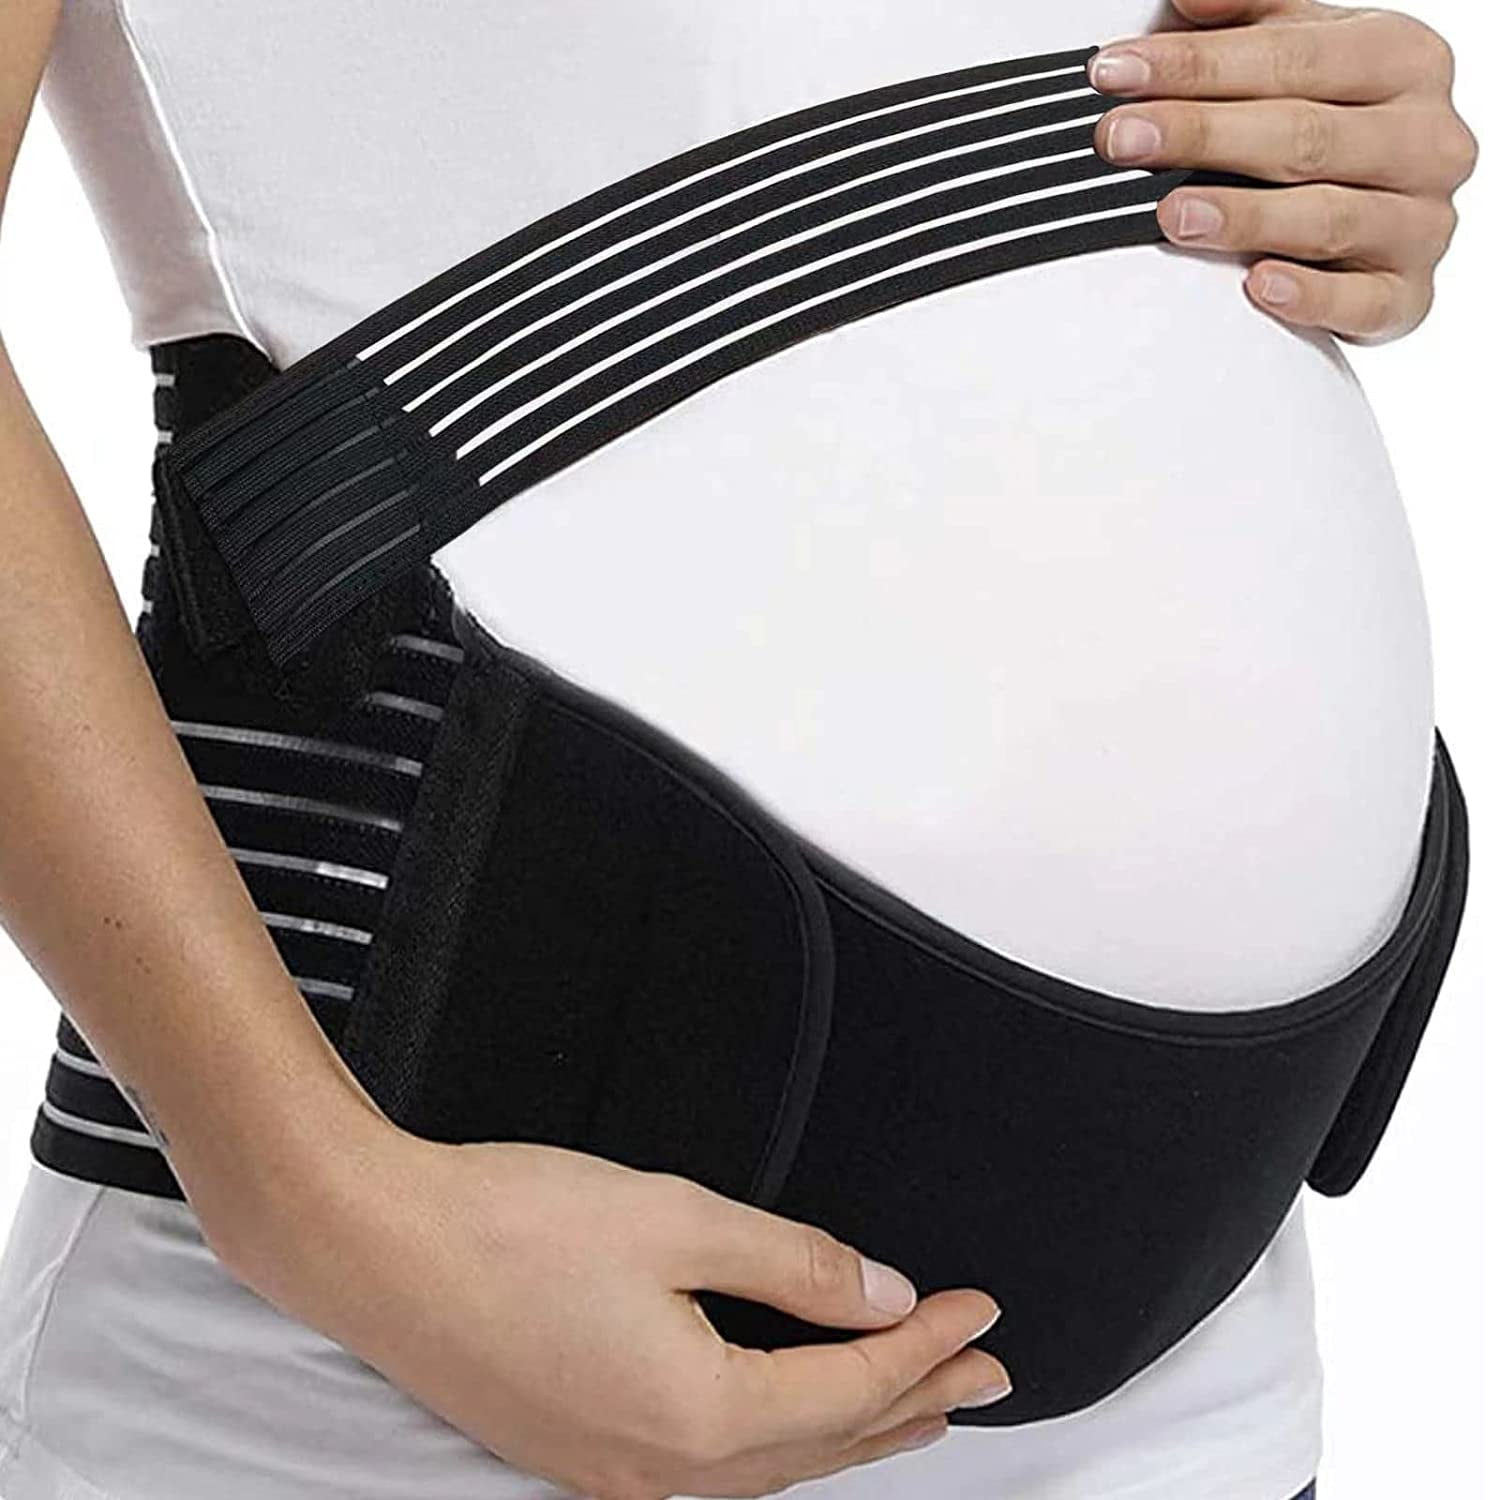 Maternity Belt, Pregnancy Support Belt, Soft Breathable Abdominal Support  Belt, Relieves Back, Hip, Pelvic, SPD and PGP Pain 